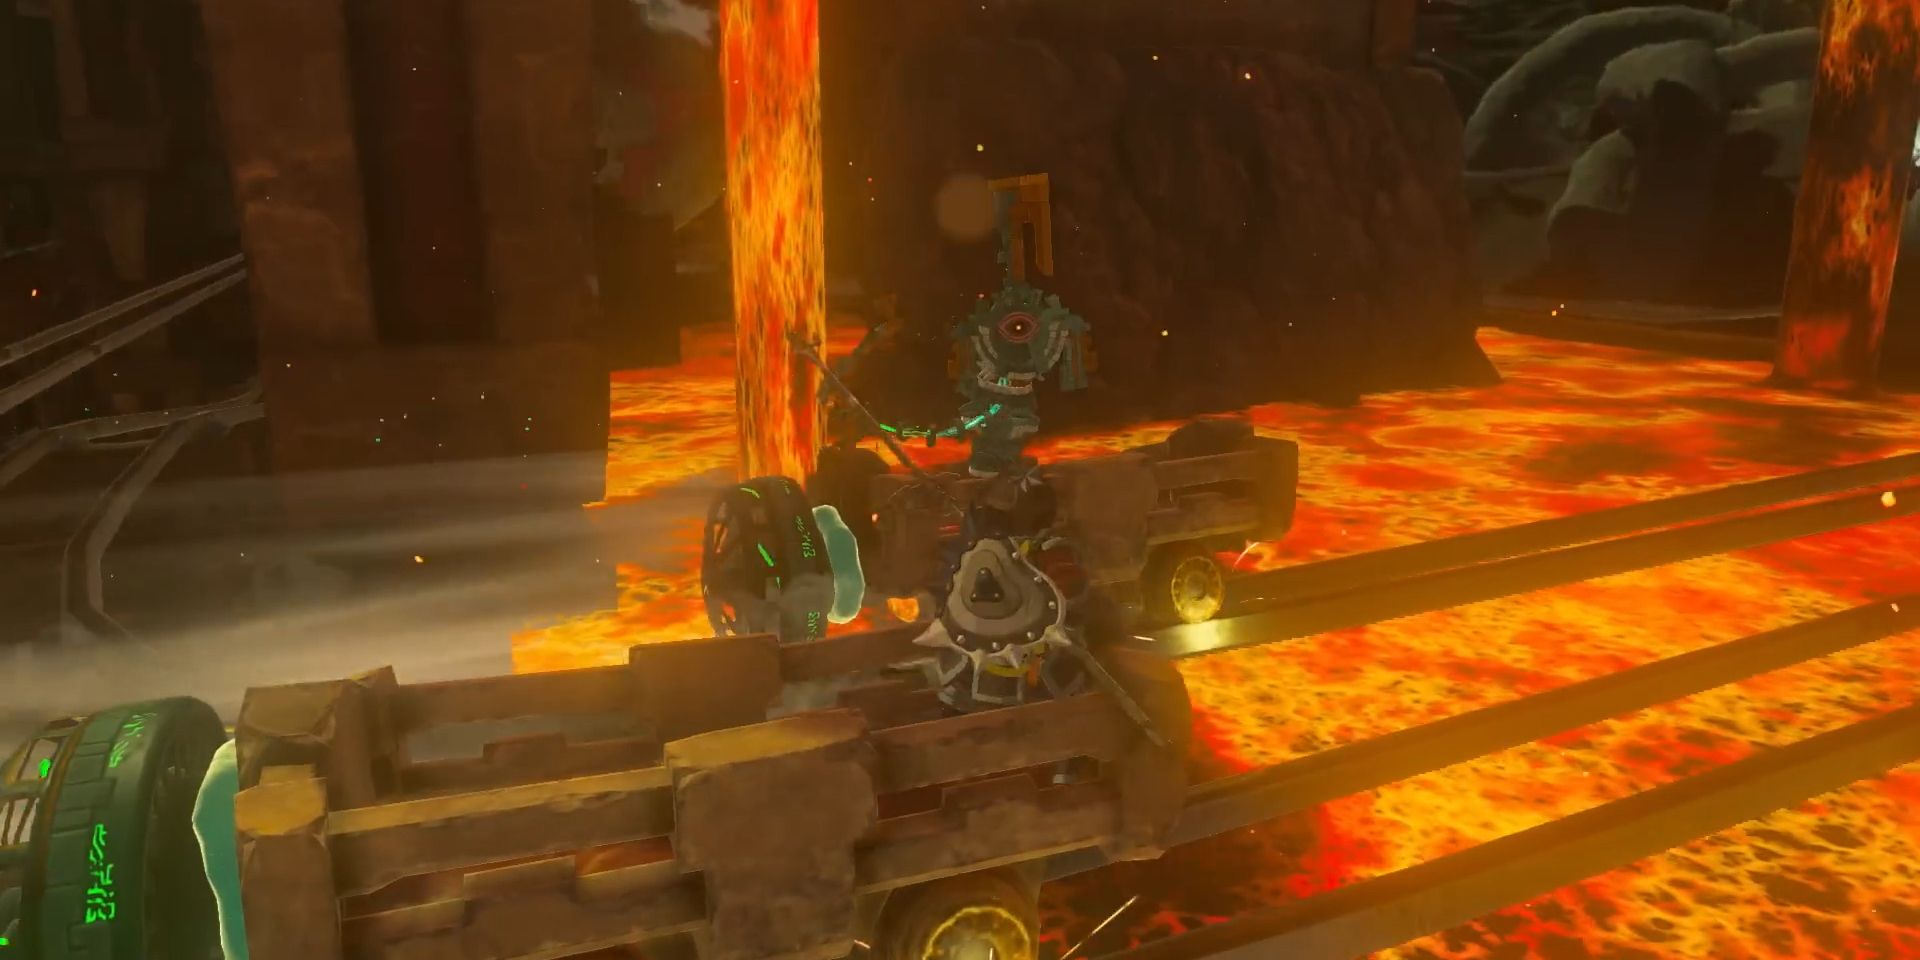 Link and a Construct ride parallel mine carts, aiming arrows at each other, as they race through a lava-filled underground area in Tears of the Kingdom